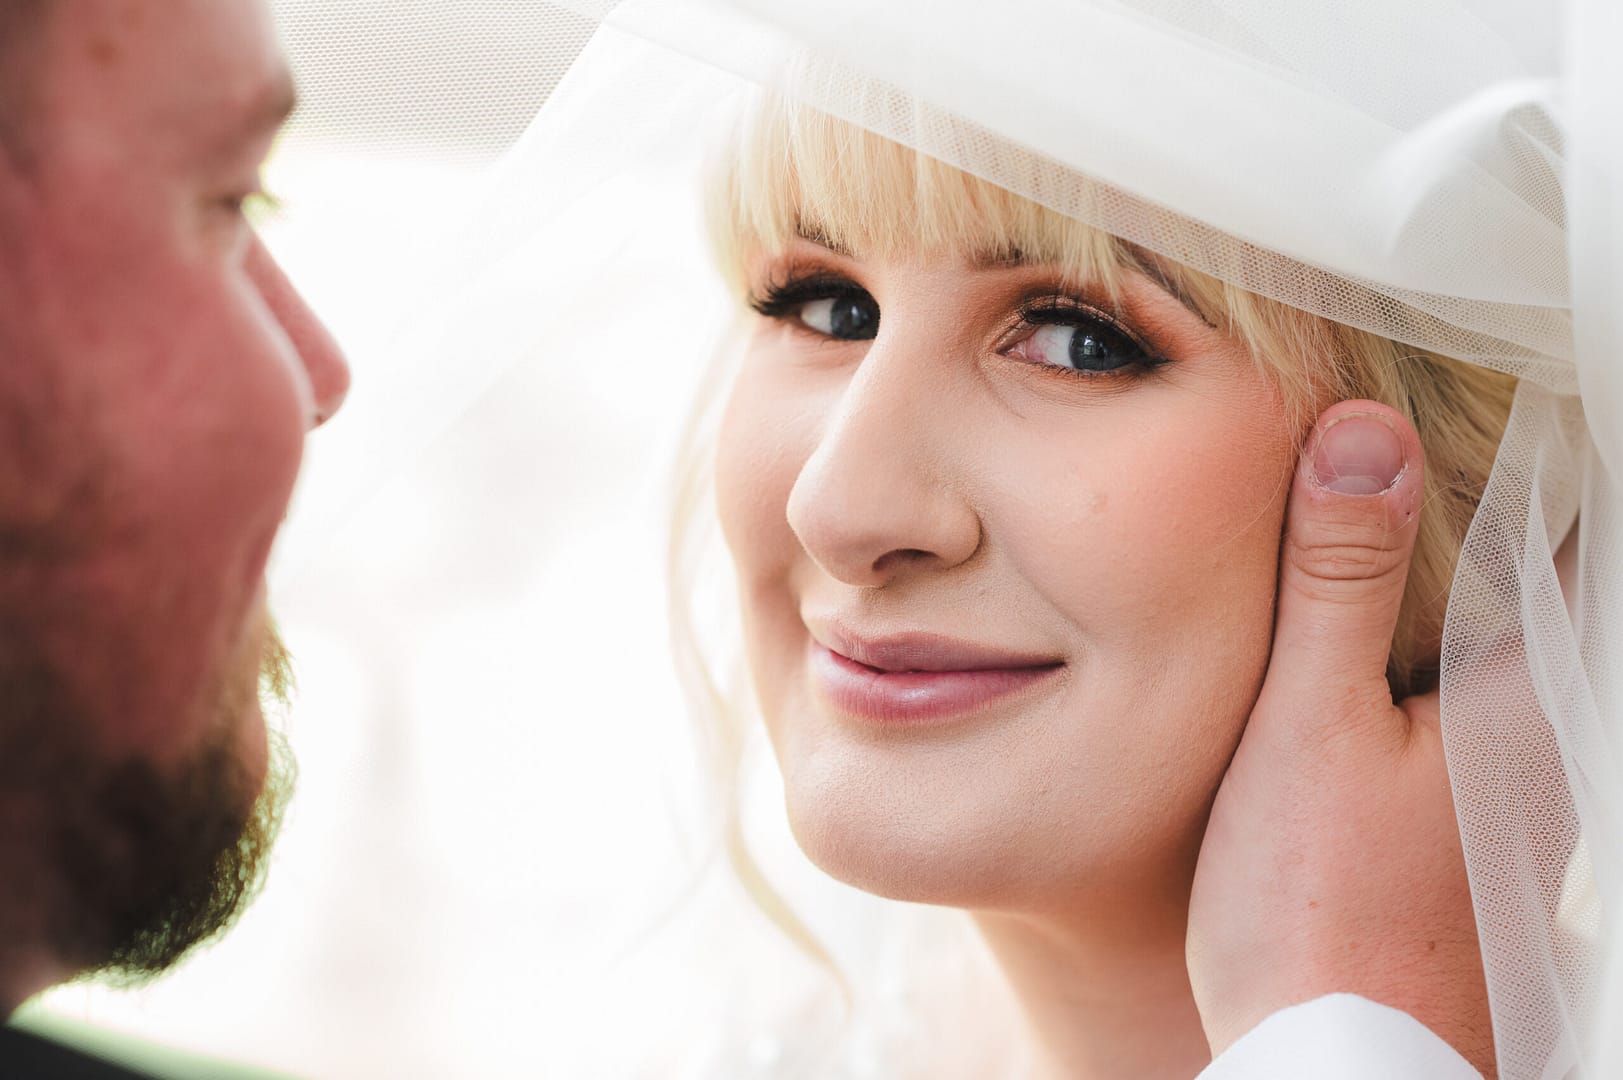 Professional Wedding Photographer - A close up of a bride and groom, the groom is gently touching the bride's face